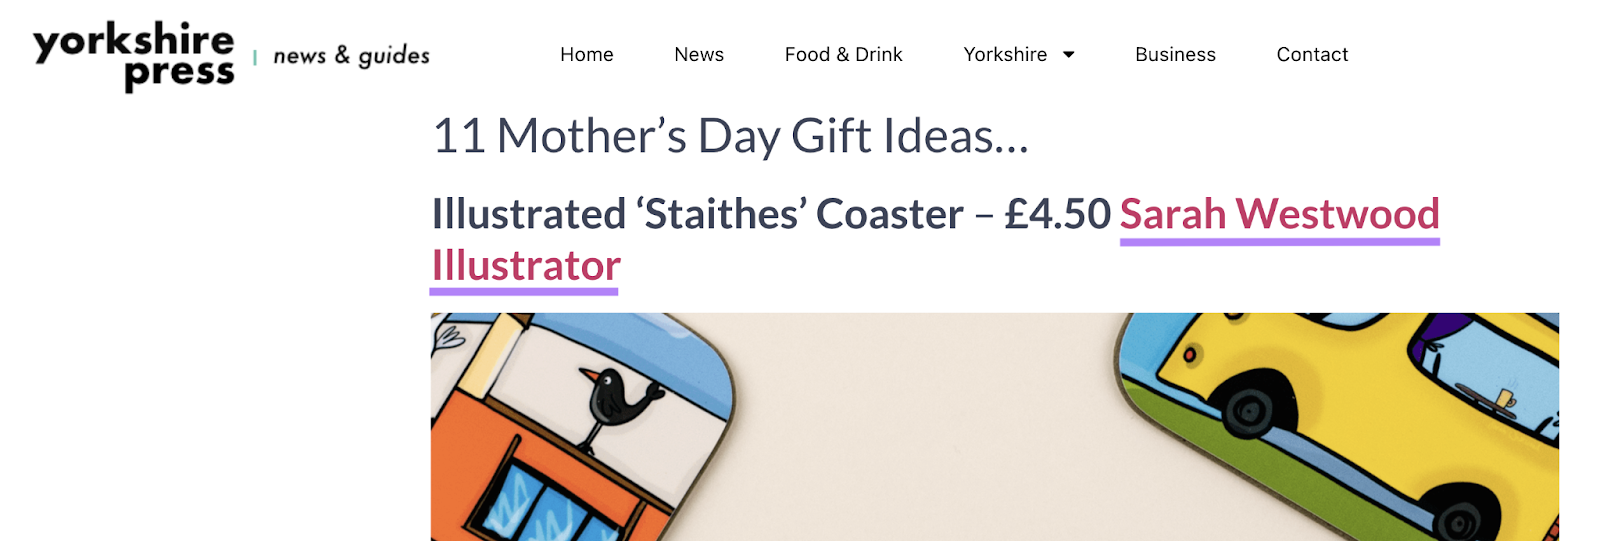 backlink to an illustrator successful  the mother's time  acquisition  ideas guide